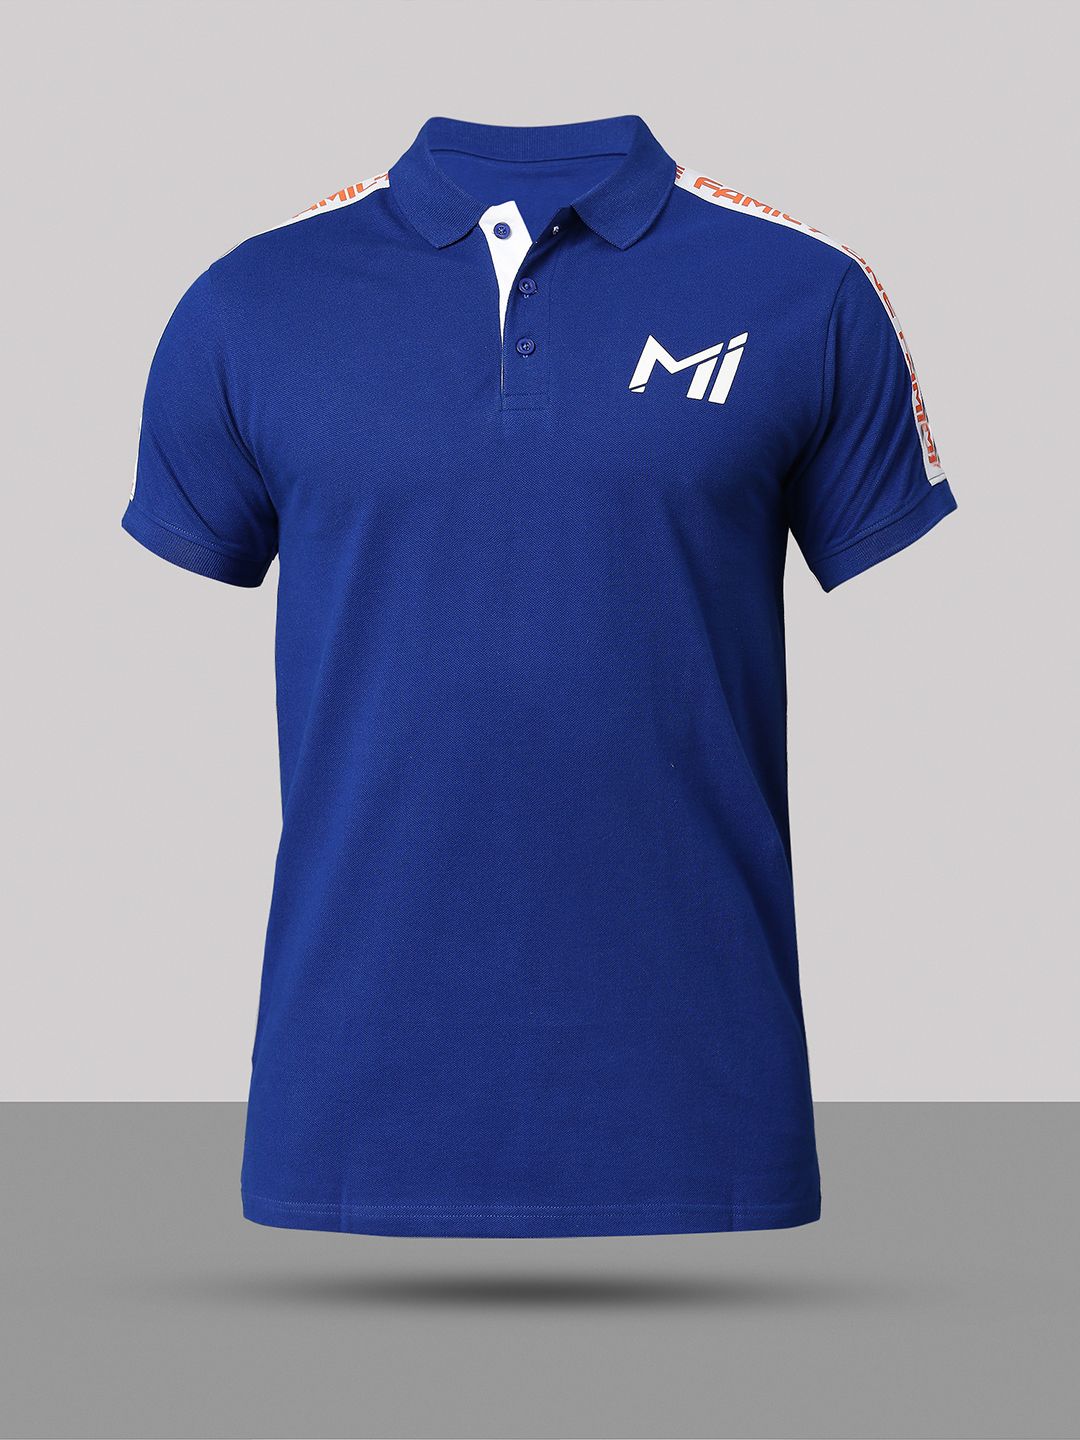 Buy Men Blue Printed Polo Collar T-Shirts From Fancode Shop.